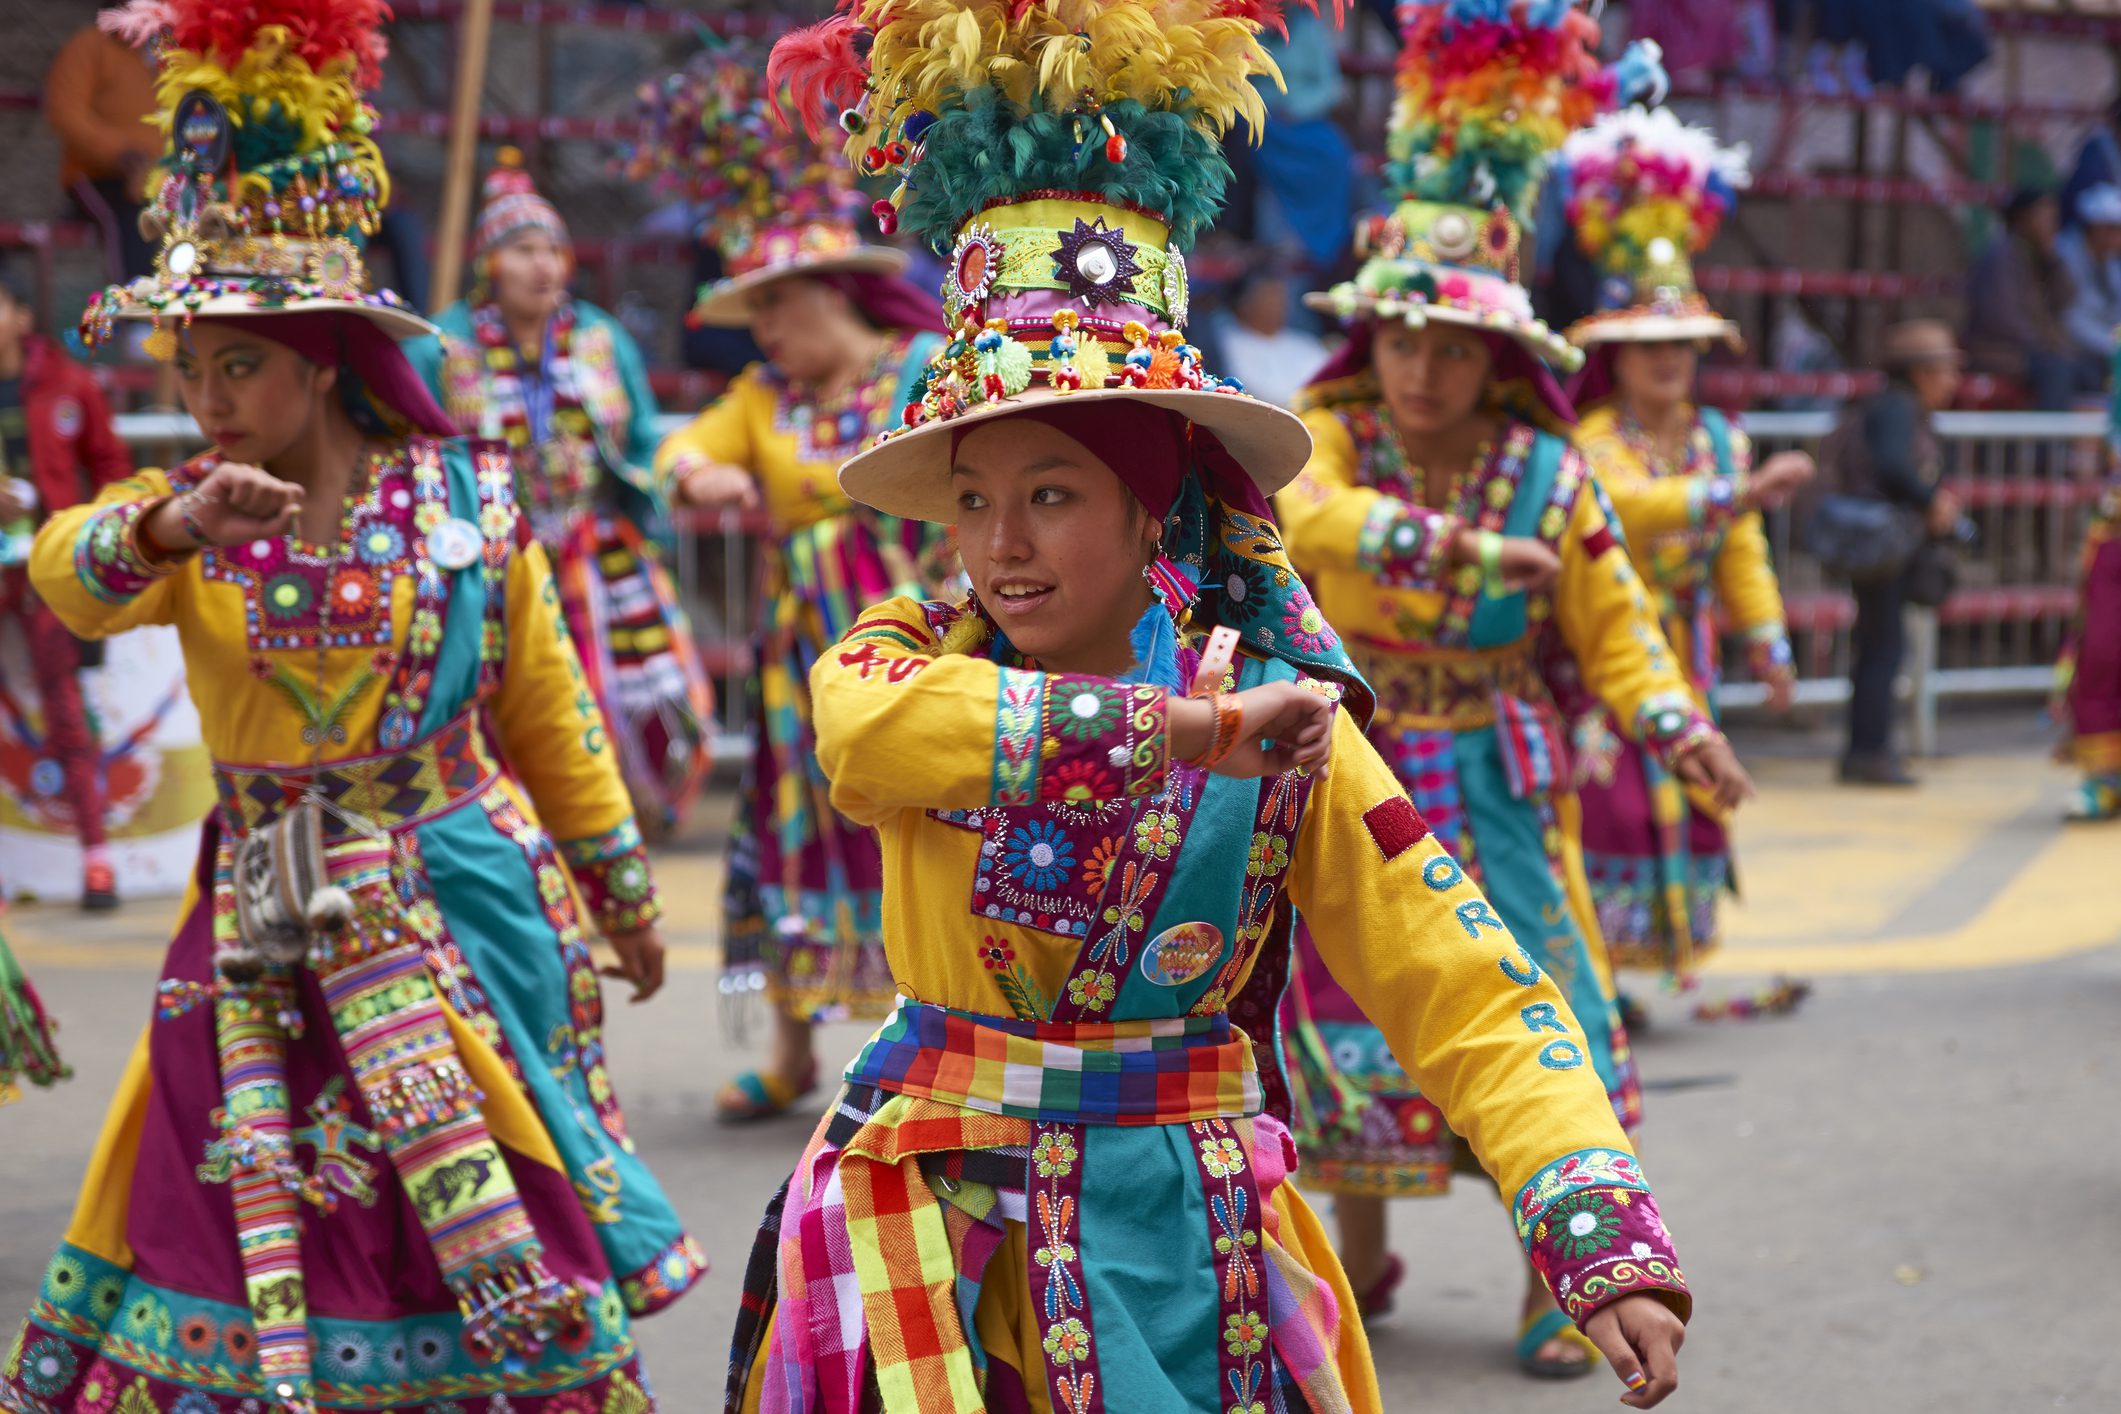 Tinkus Dance Group at the Oruro Carnival